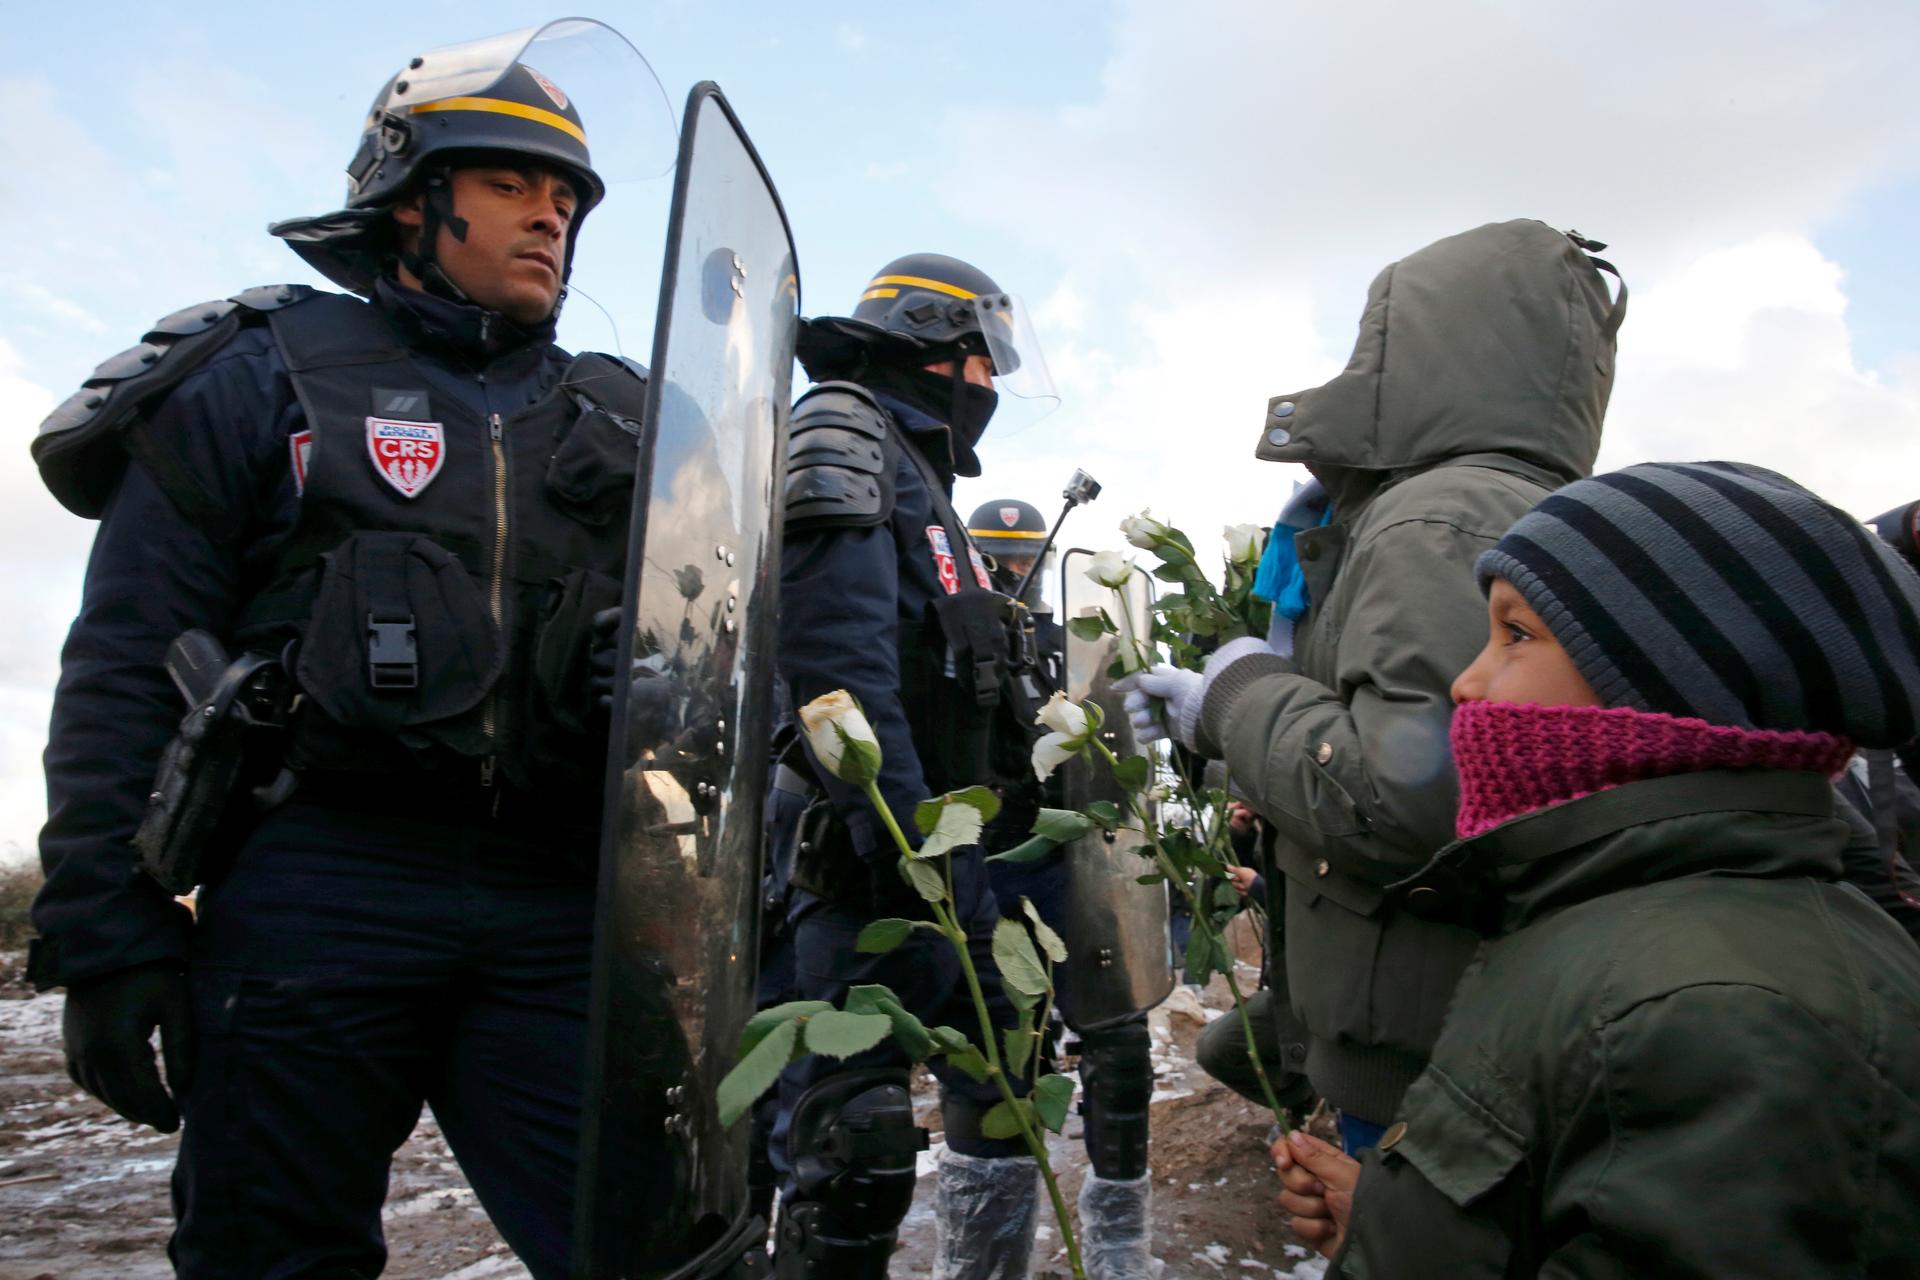 Youngs migrants holding white flowers face French riot police officers who secure the area near makeshift shelters during the partial dismantlement of the camp for migrants called the "Jungle" in Calais, France, March 7, 2016.